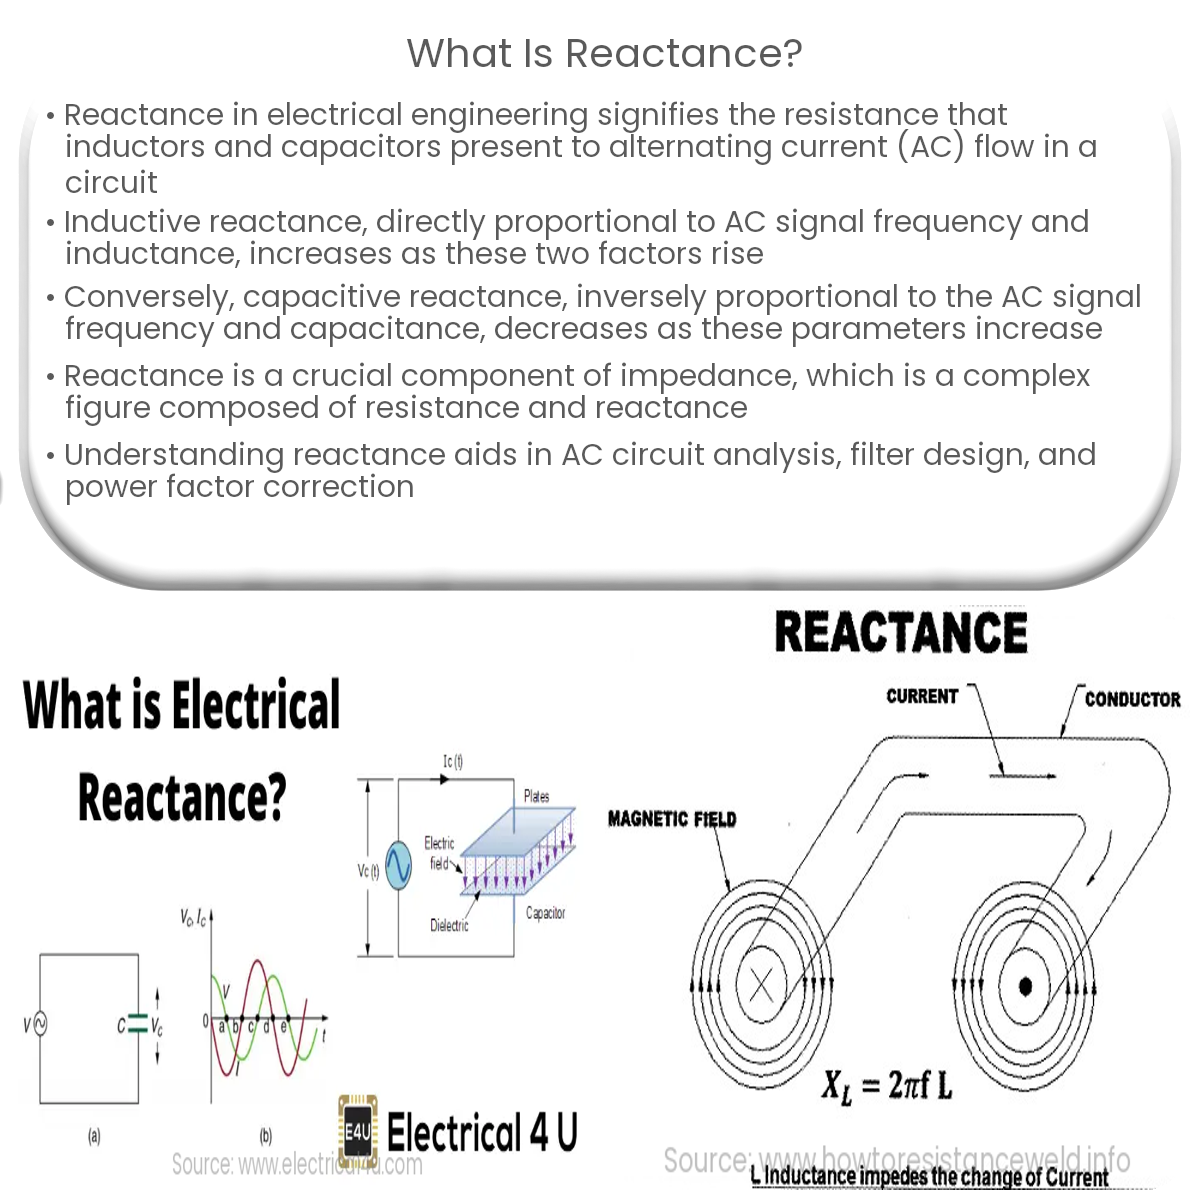 What is reactance?